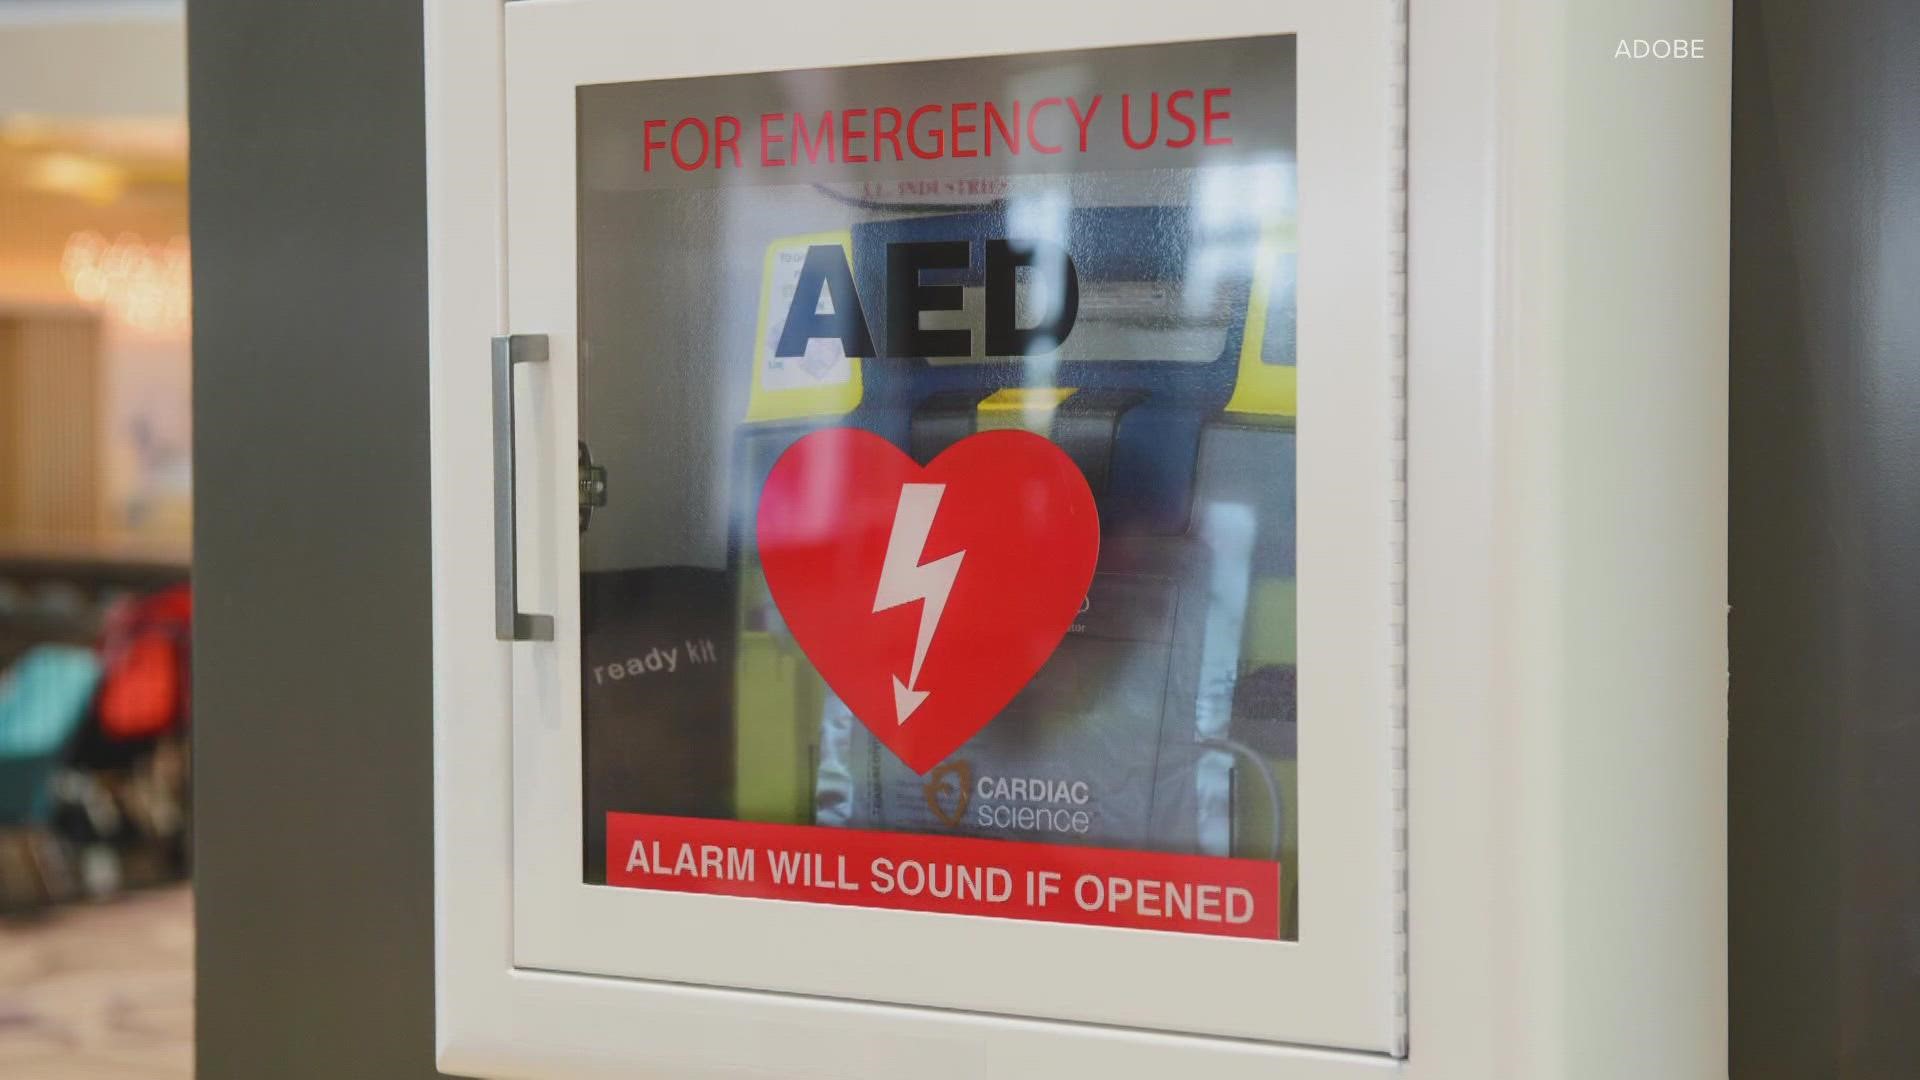 According to the American Heart Association, survival rates from cardiac arrest double when a bystander is able to use an AED.